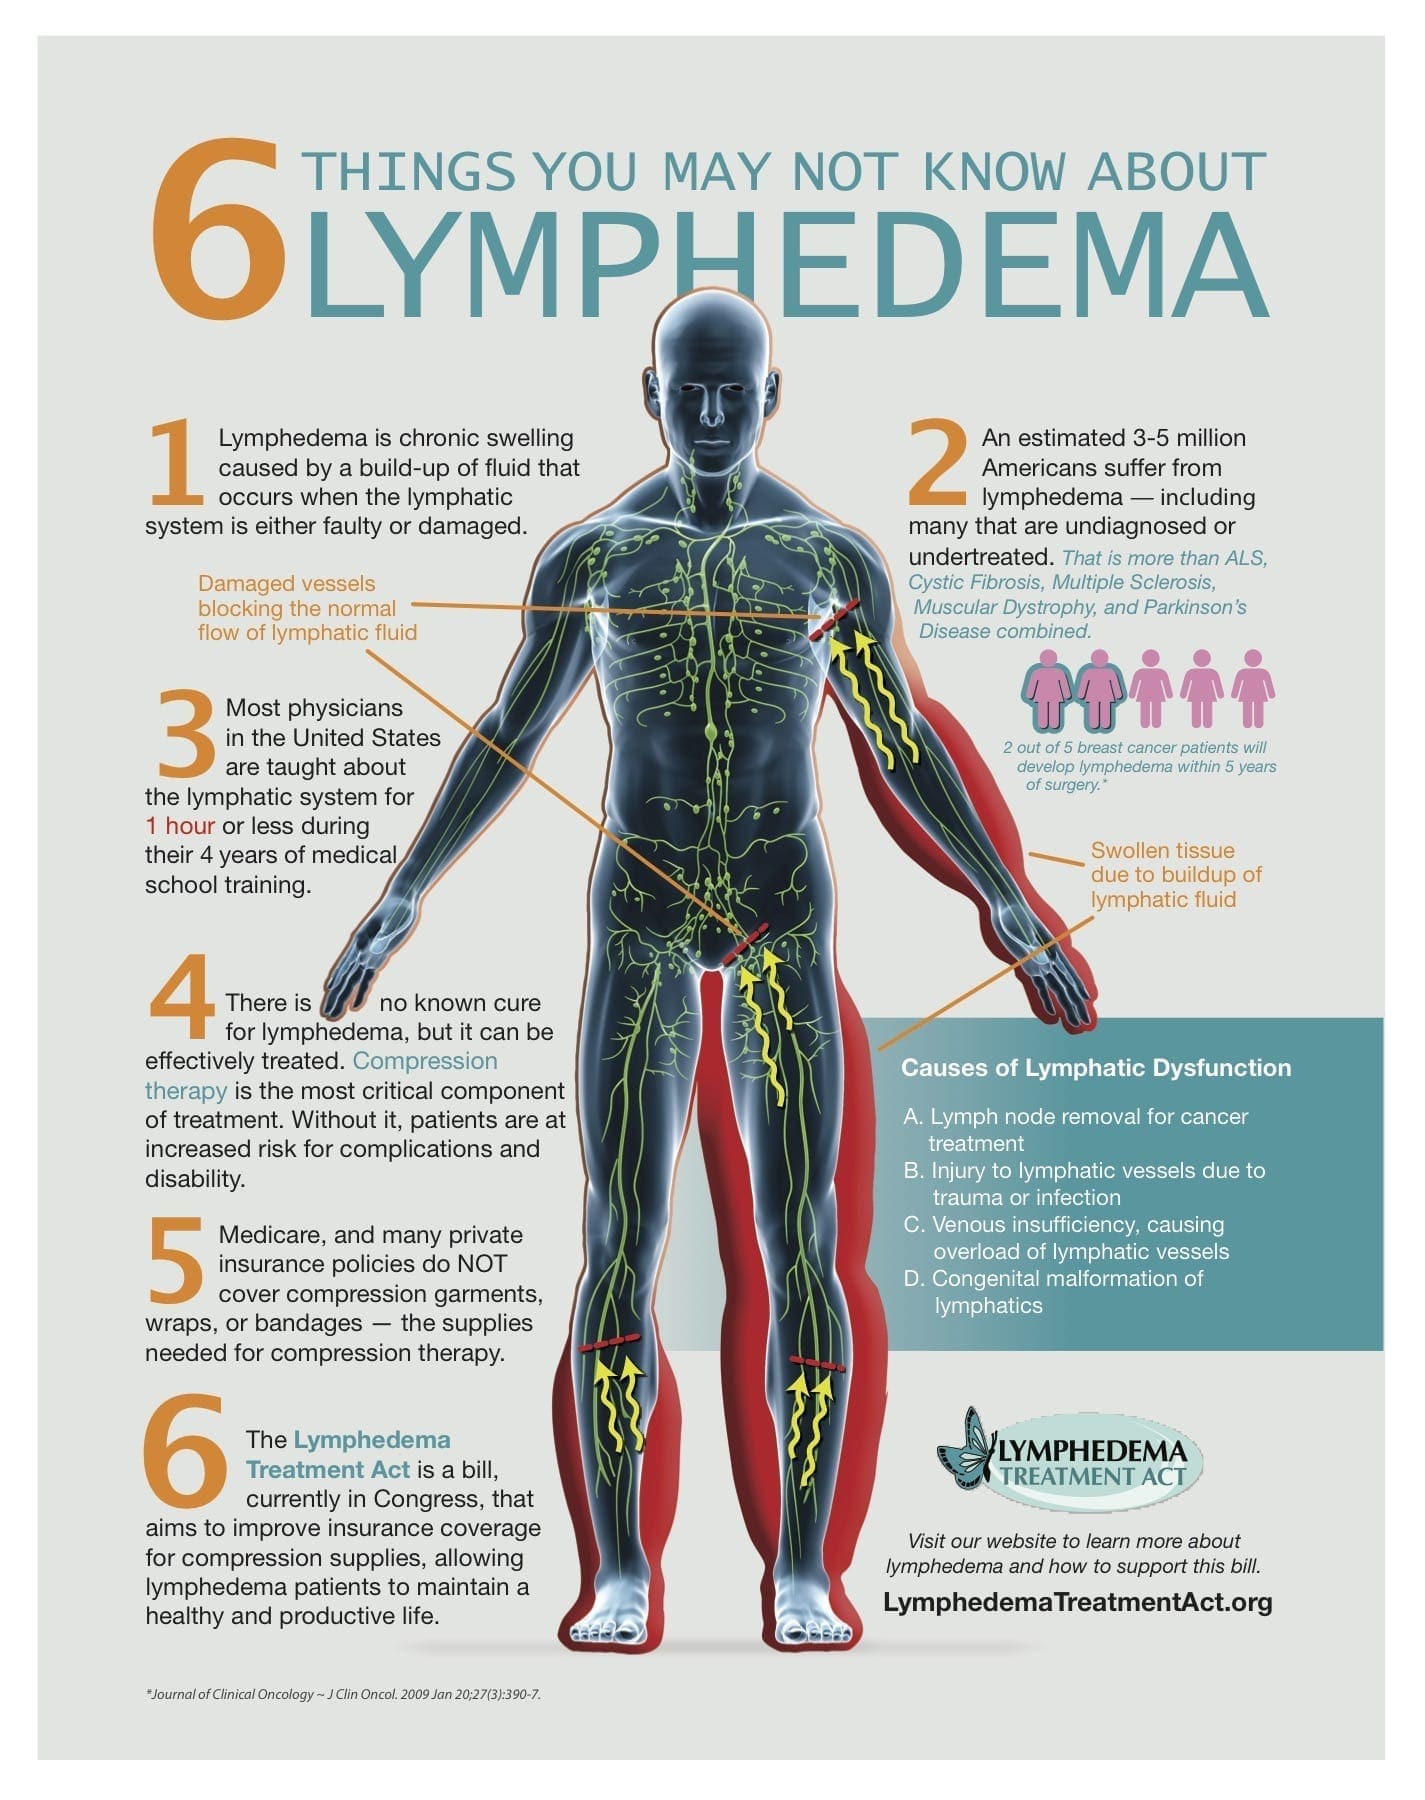 Treatment for Lymphedema - The Lymphedema Association of Manitoba (LAM)